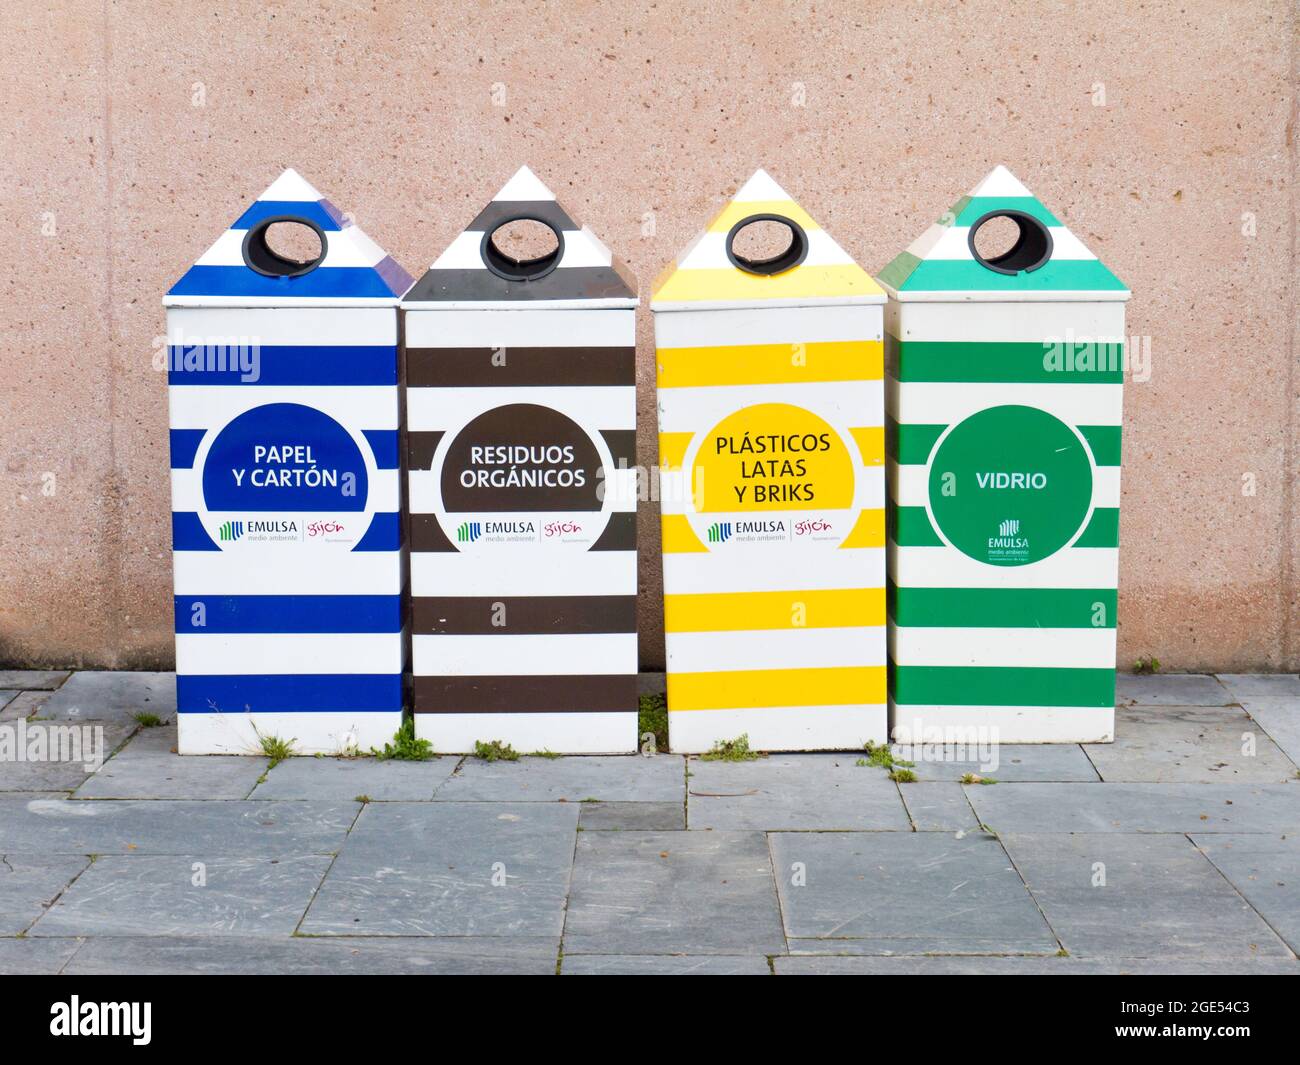 GIJON, SPAIN - April 01, 2018:  Separate paper, plastic, glass and organic garbage collection bins in the form of beach cabins in the Atlantico botani Stock Photo